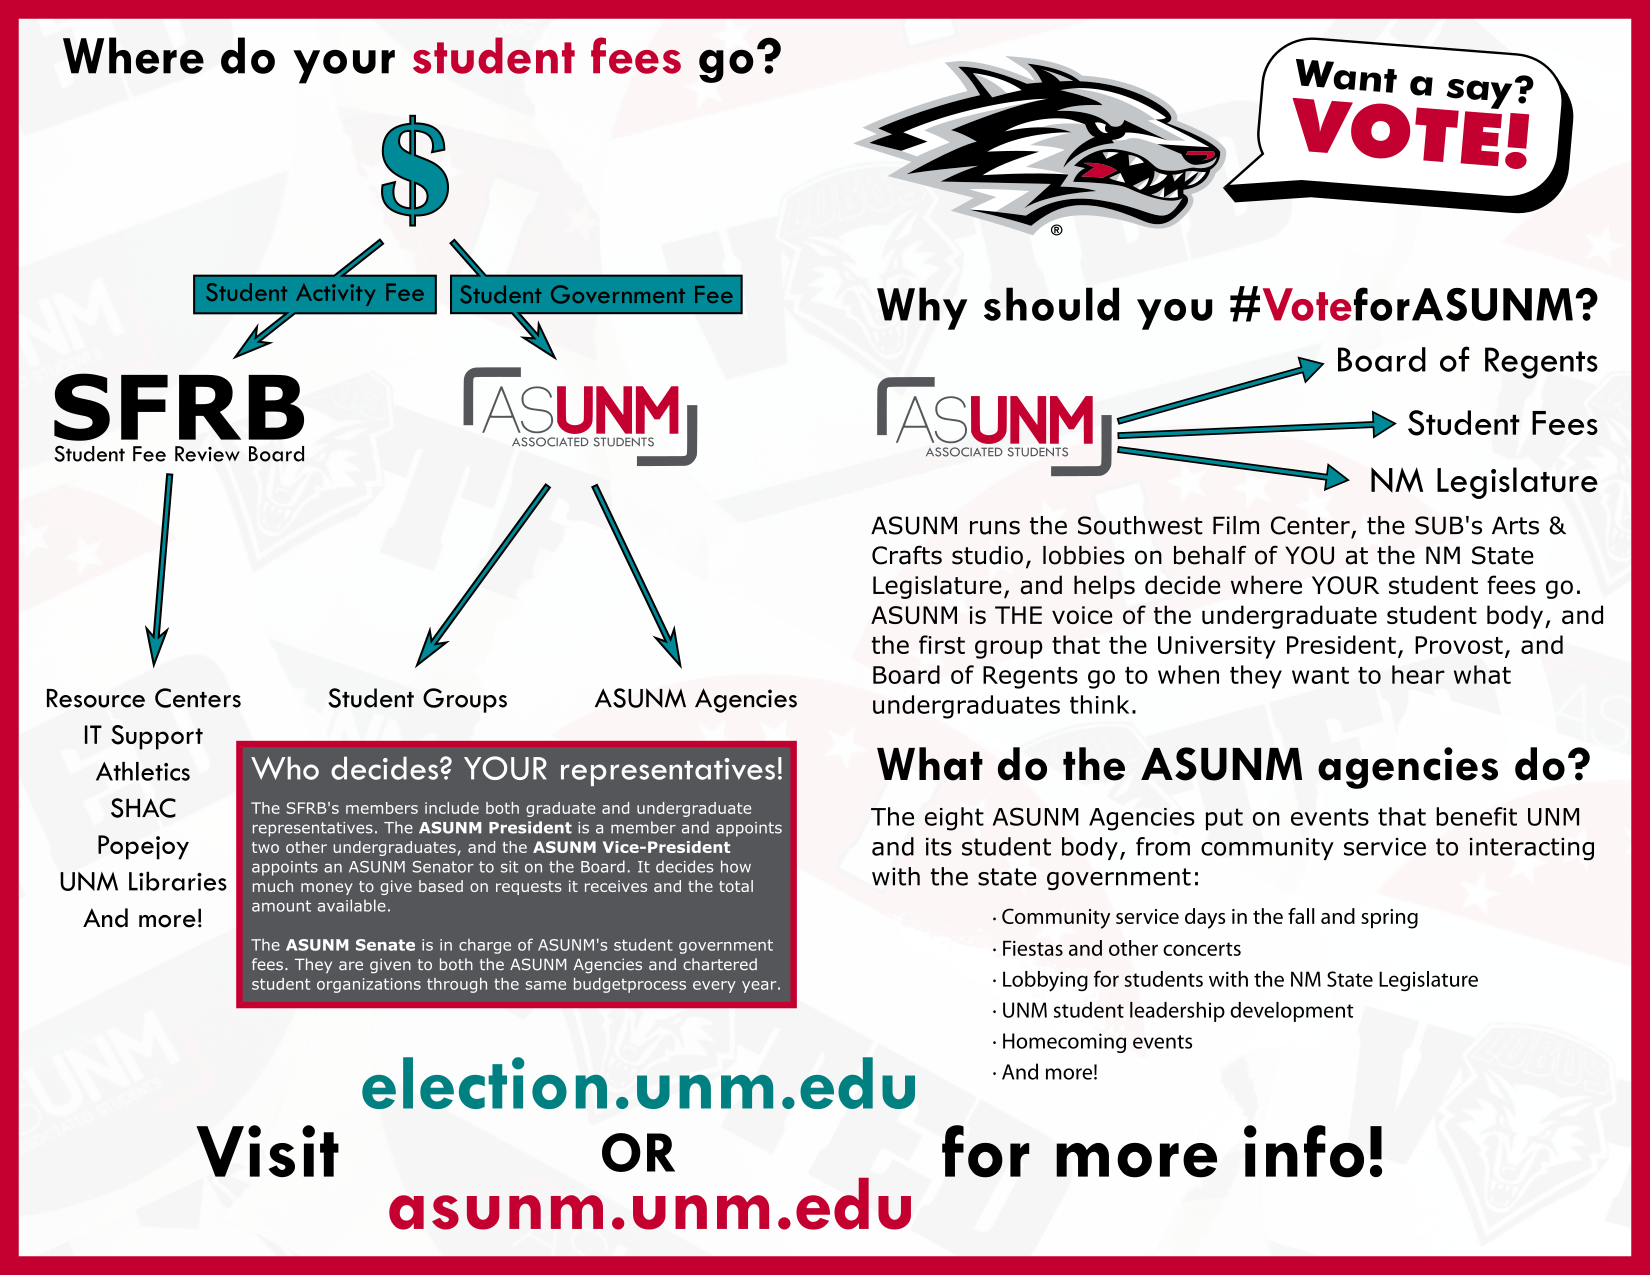 ASUNM Does All This, So You Should #VoteforASUNM